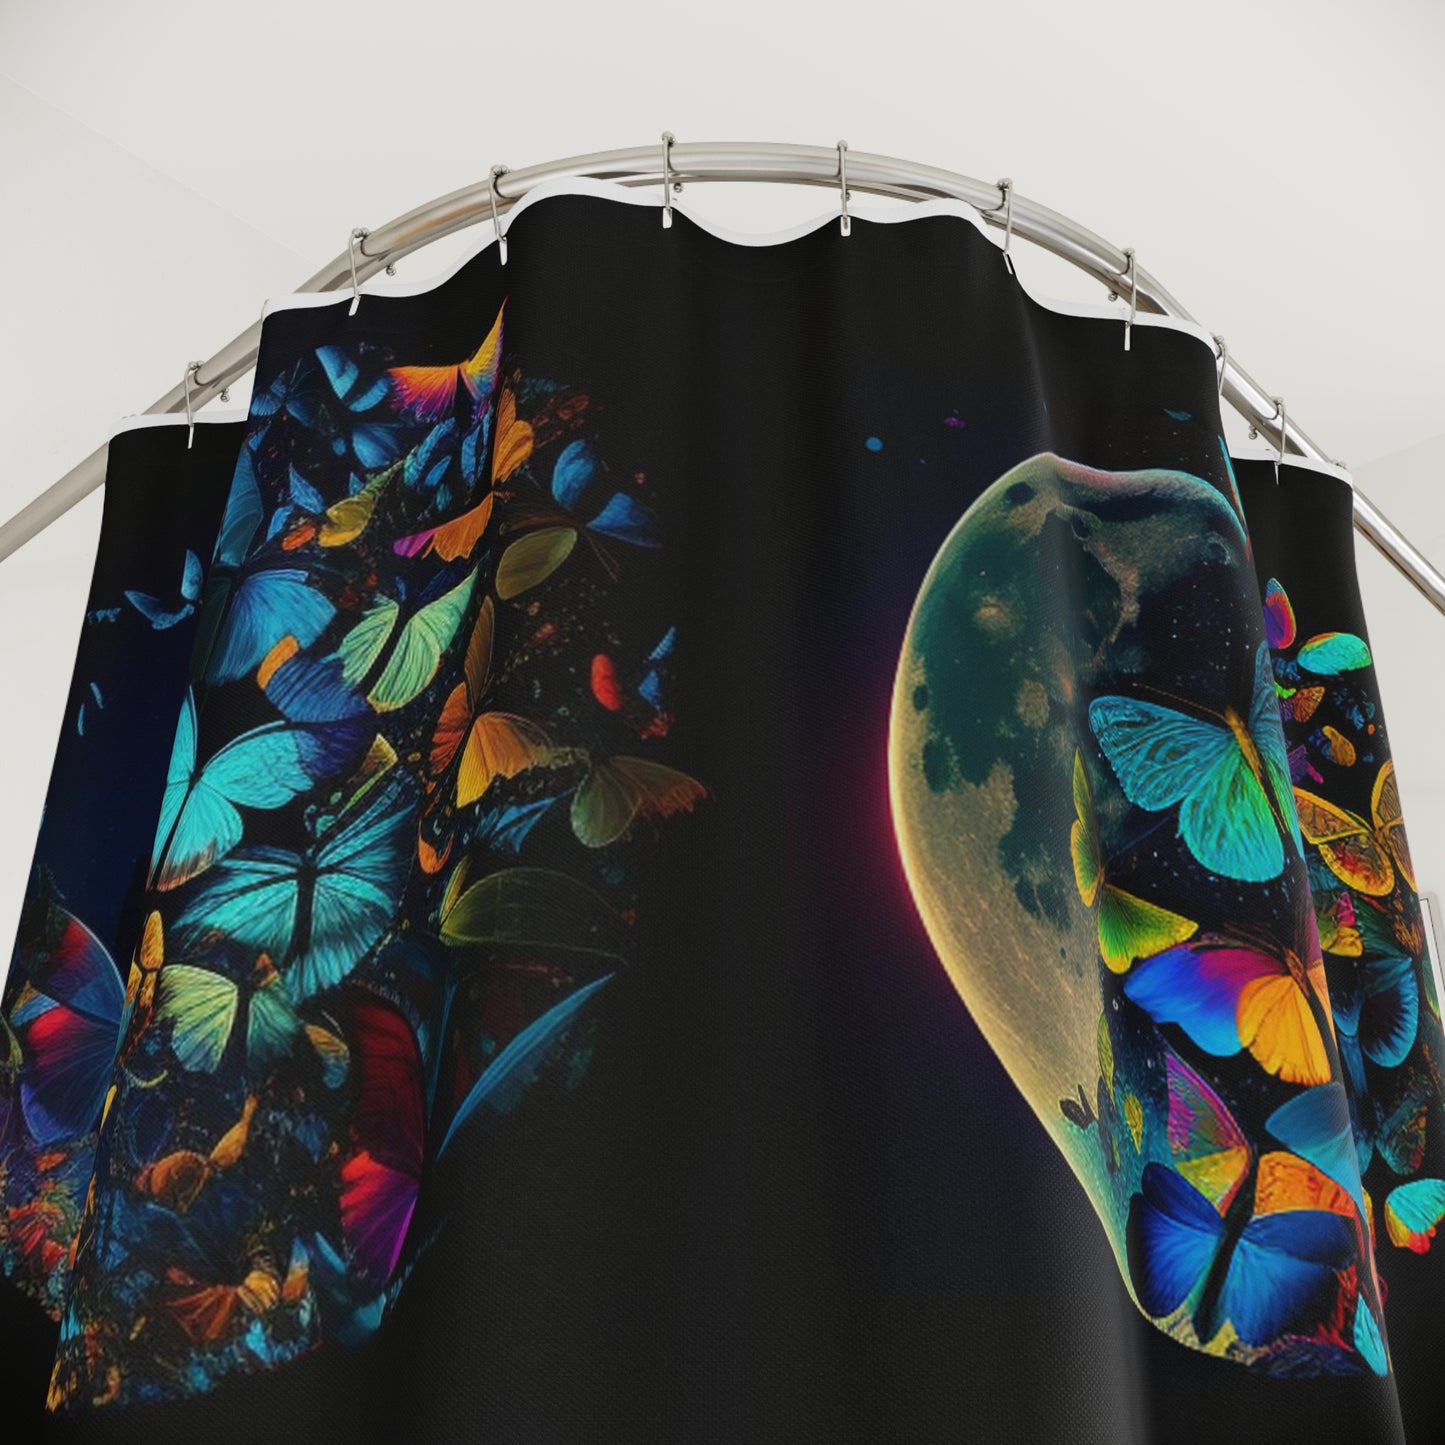 Polyester Shower Curtain Moon Butterfly 5